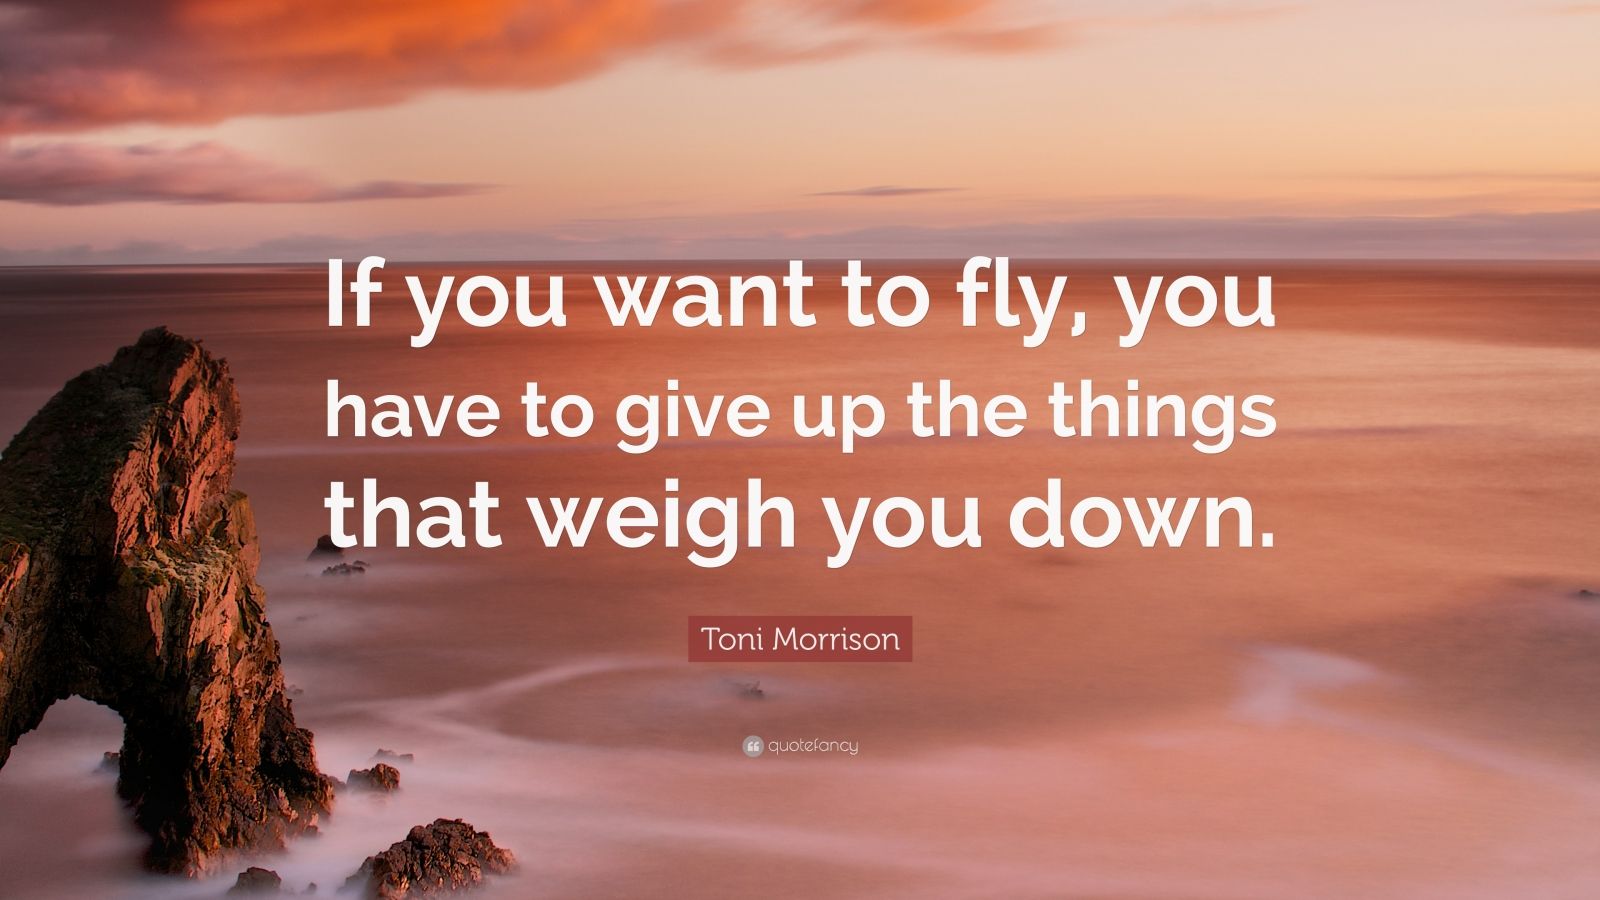 Toni Morrison Quote “if You Want To Fly You Have To Give Up The Things That Weigh You Down